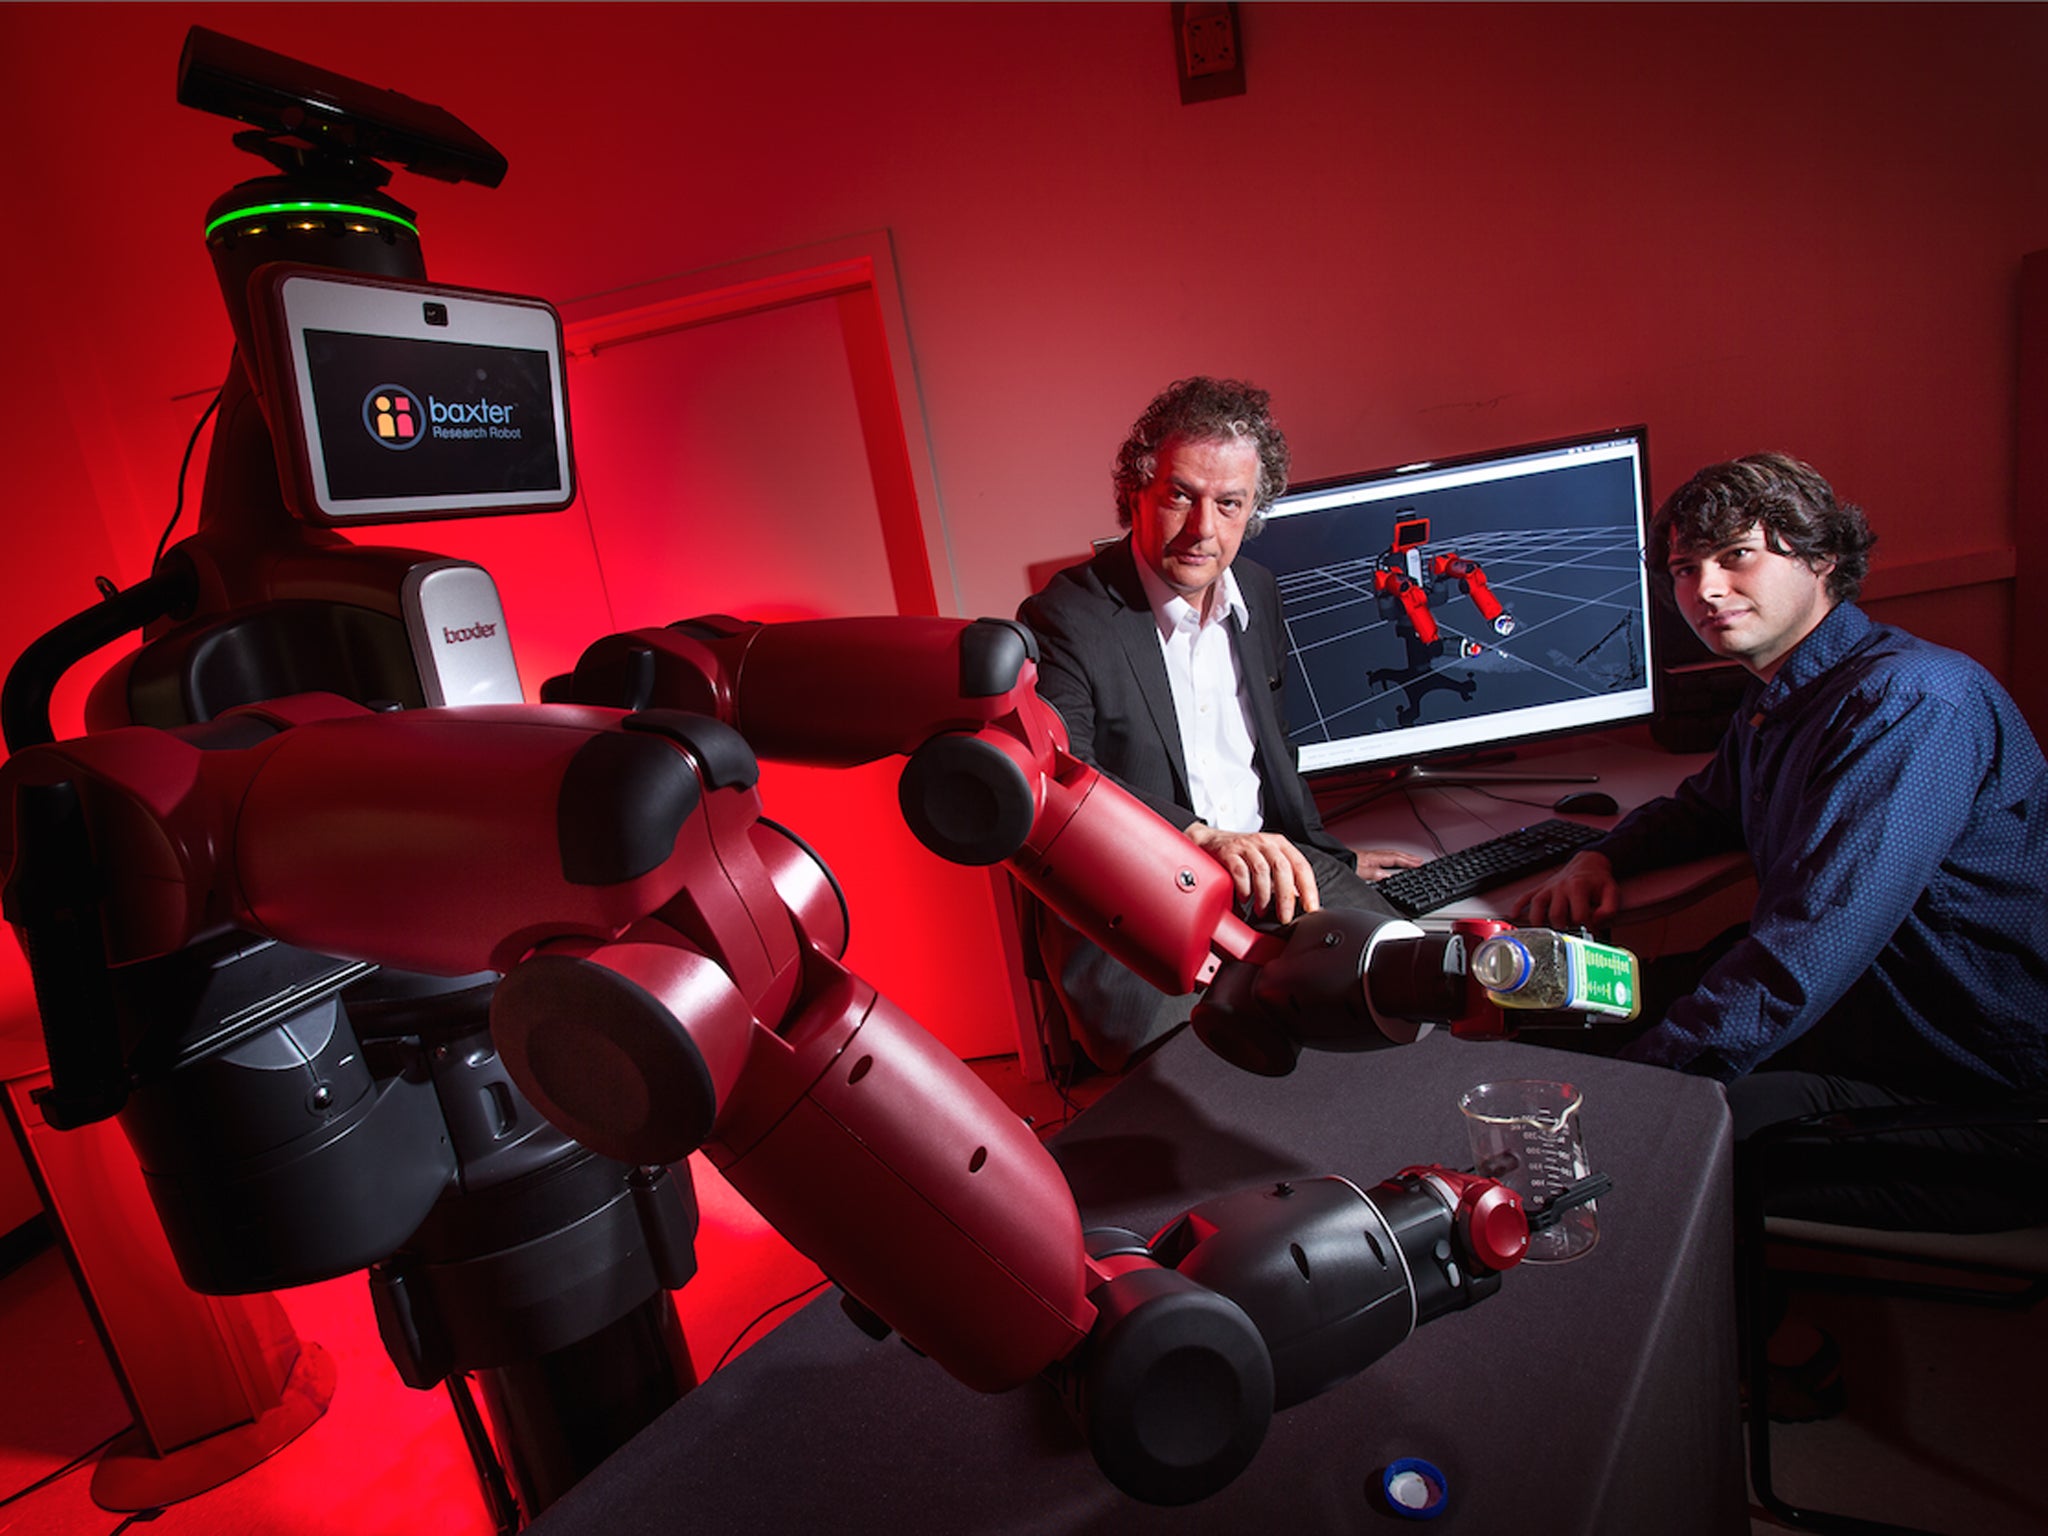 University of Maryland computer scientist Yiannis Aloimonos (center) is developing robotic systems able to visually recognize objects and generate new behavior based on those observations